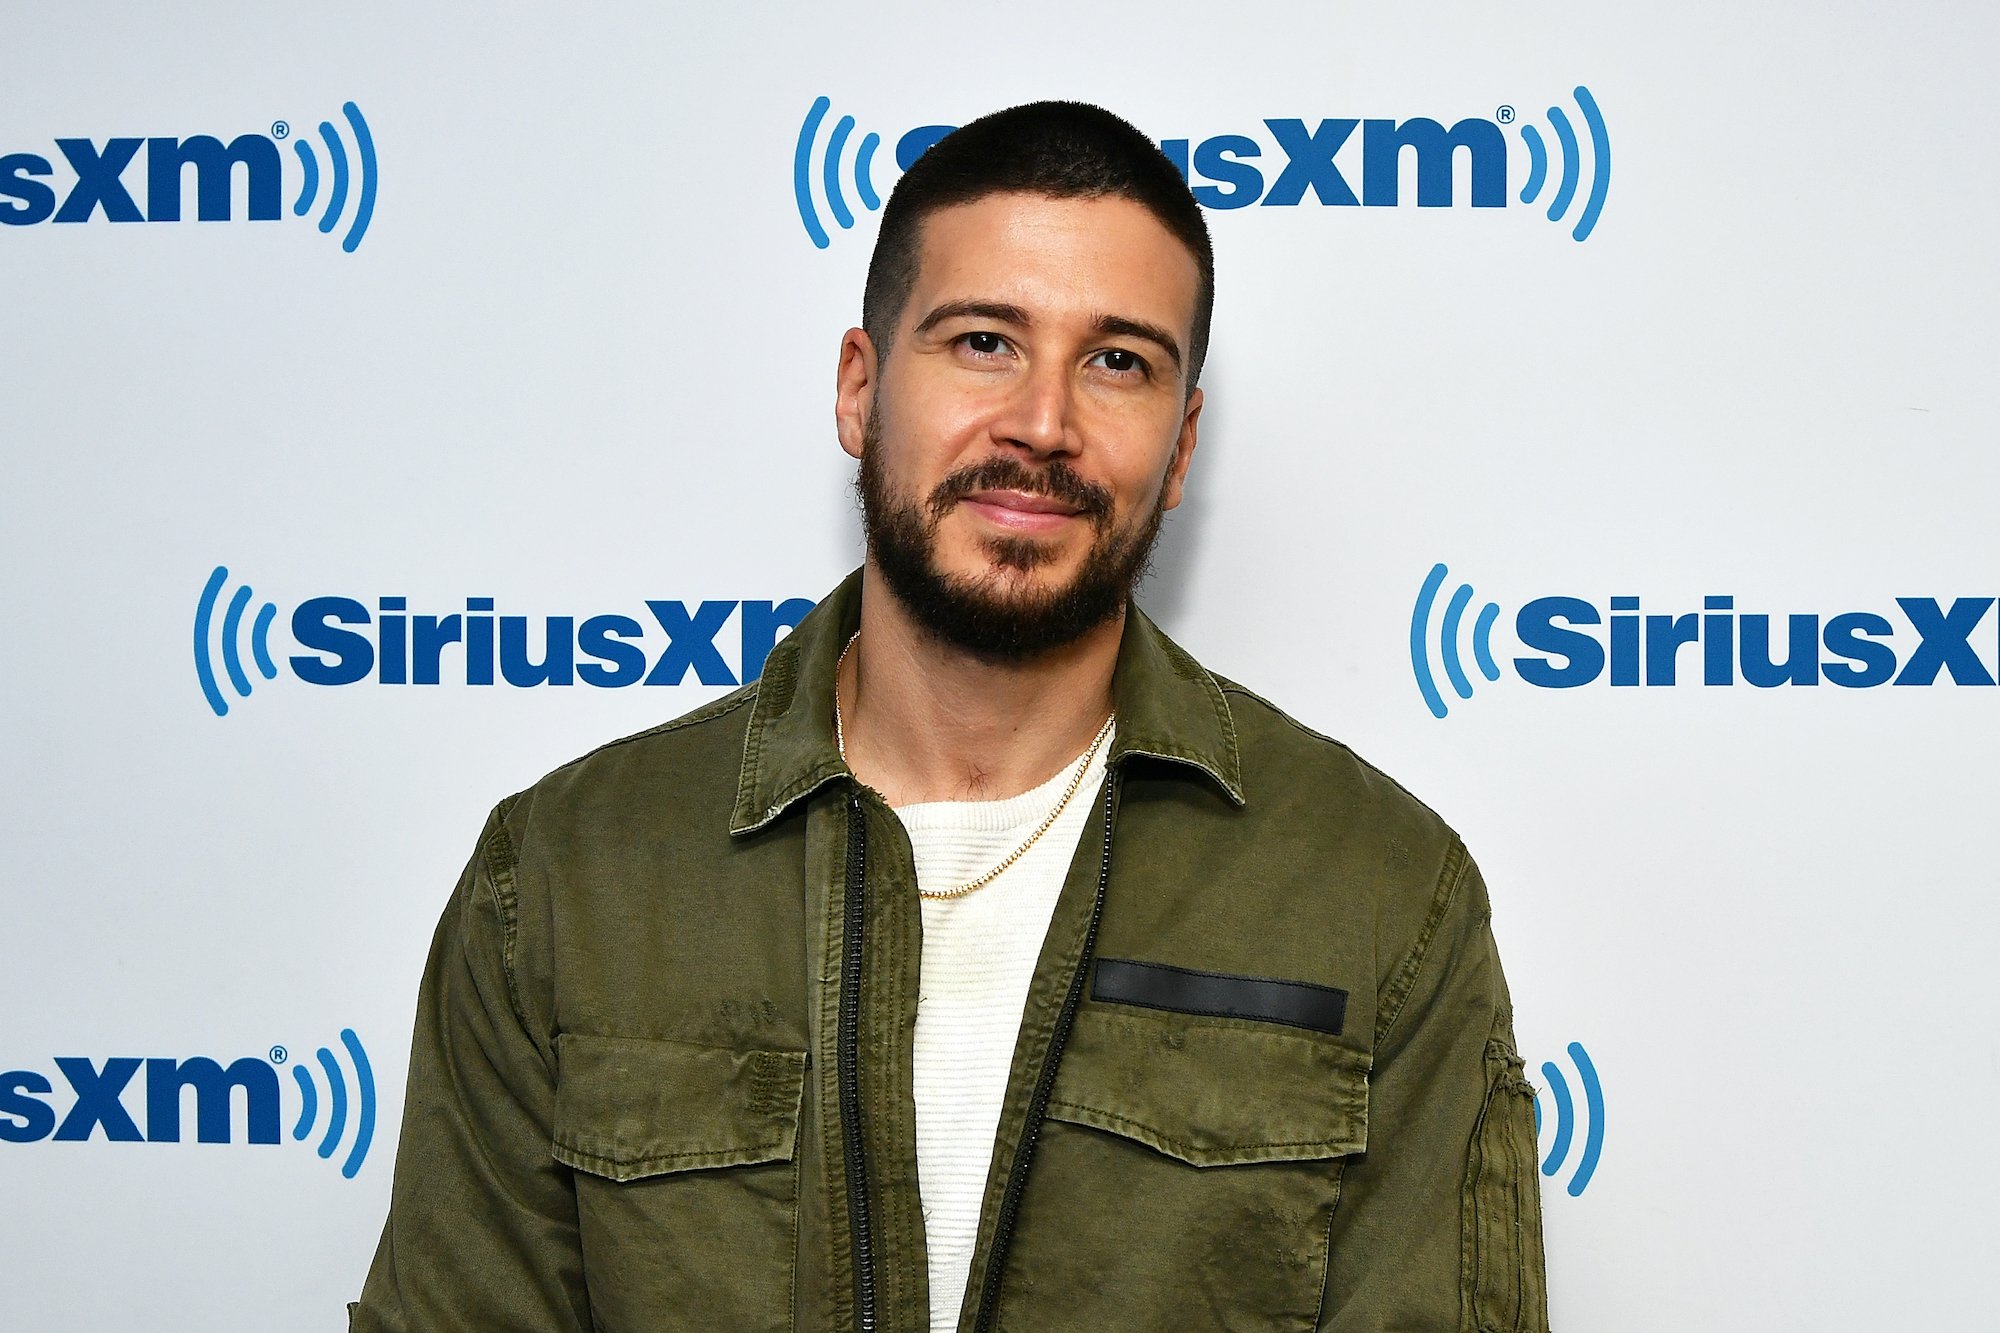 Vinny Guadagnino from 'Jersey Shore' and 'Jersey Shore: Family Vacation' at the SiriusXM studios